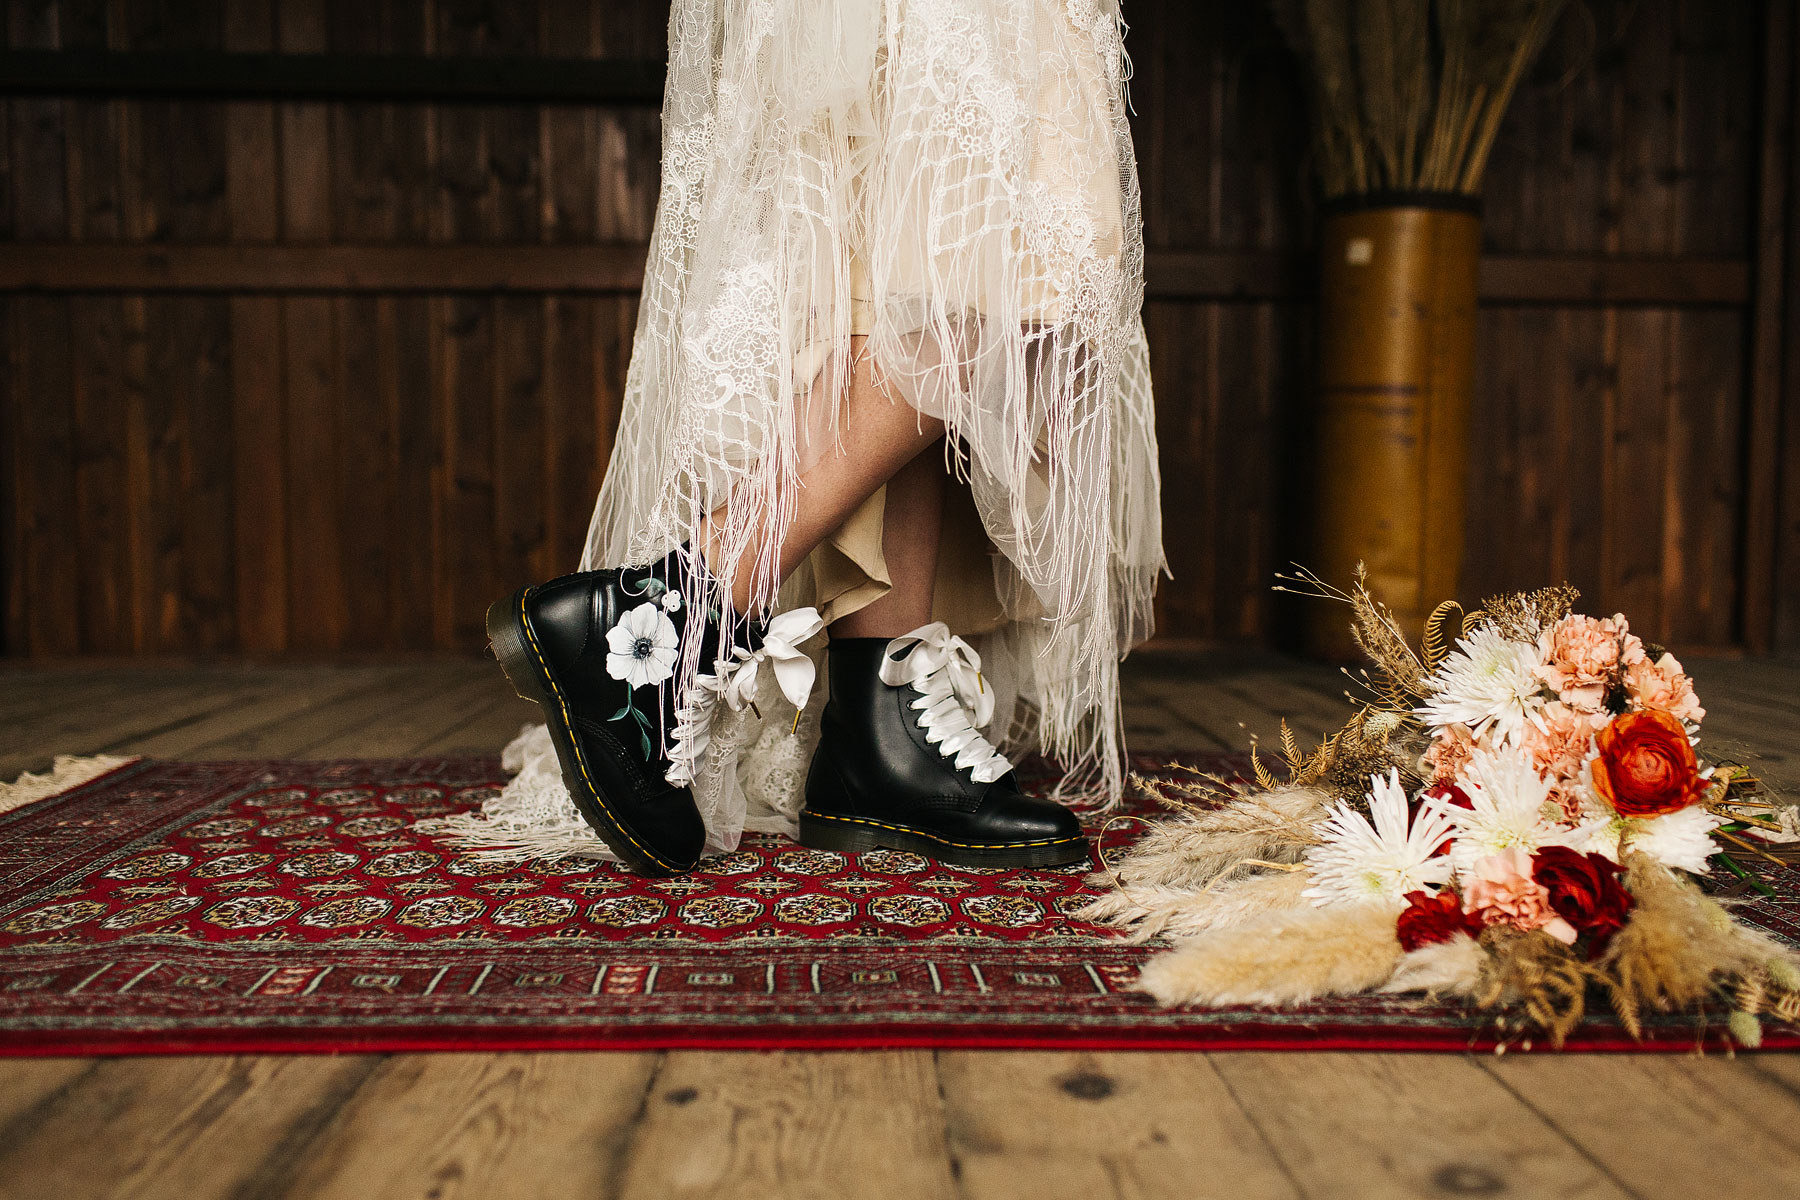 hand painted diy wedding dr martens at hardcastle crags on the national trust site